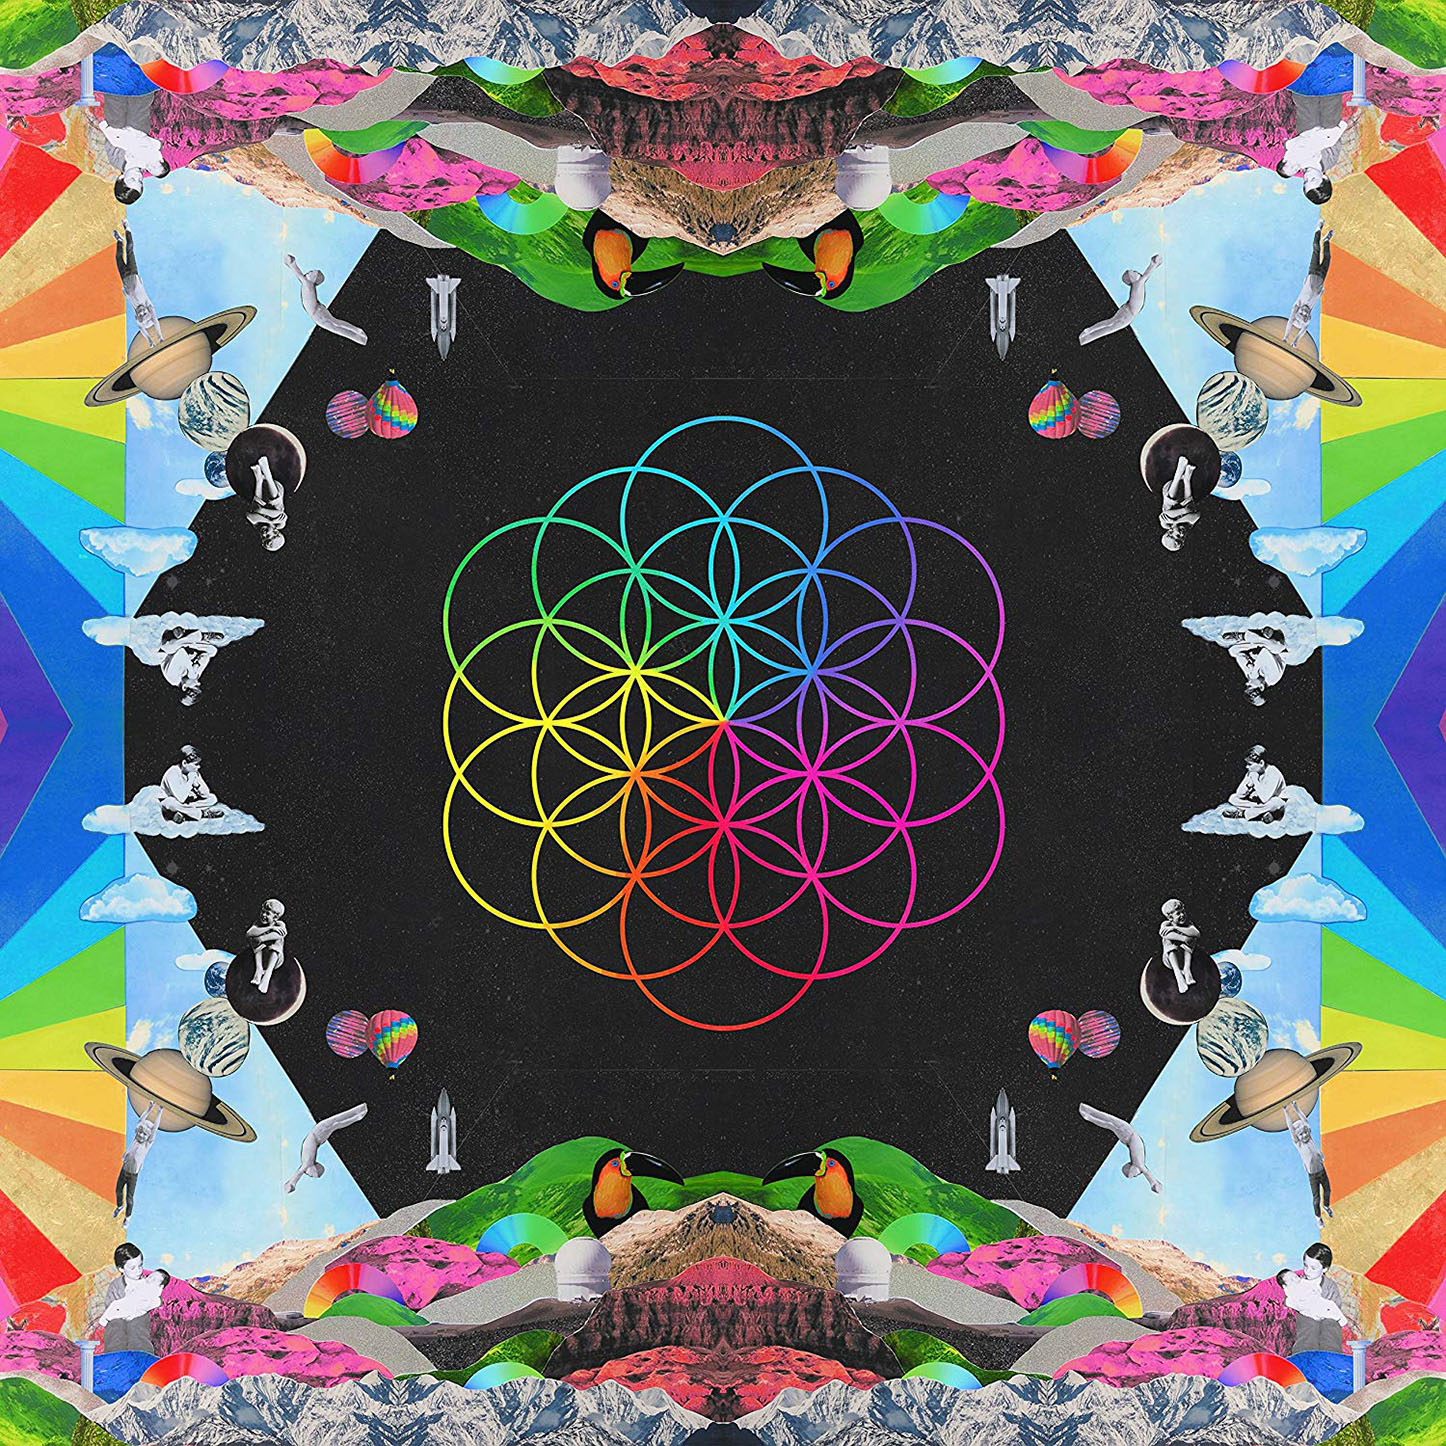 「Adventure of a Lifetime」収録アルバム『A Head Full of Dreams』 ／Coldplay